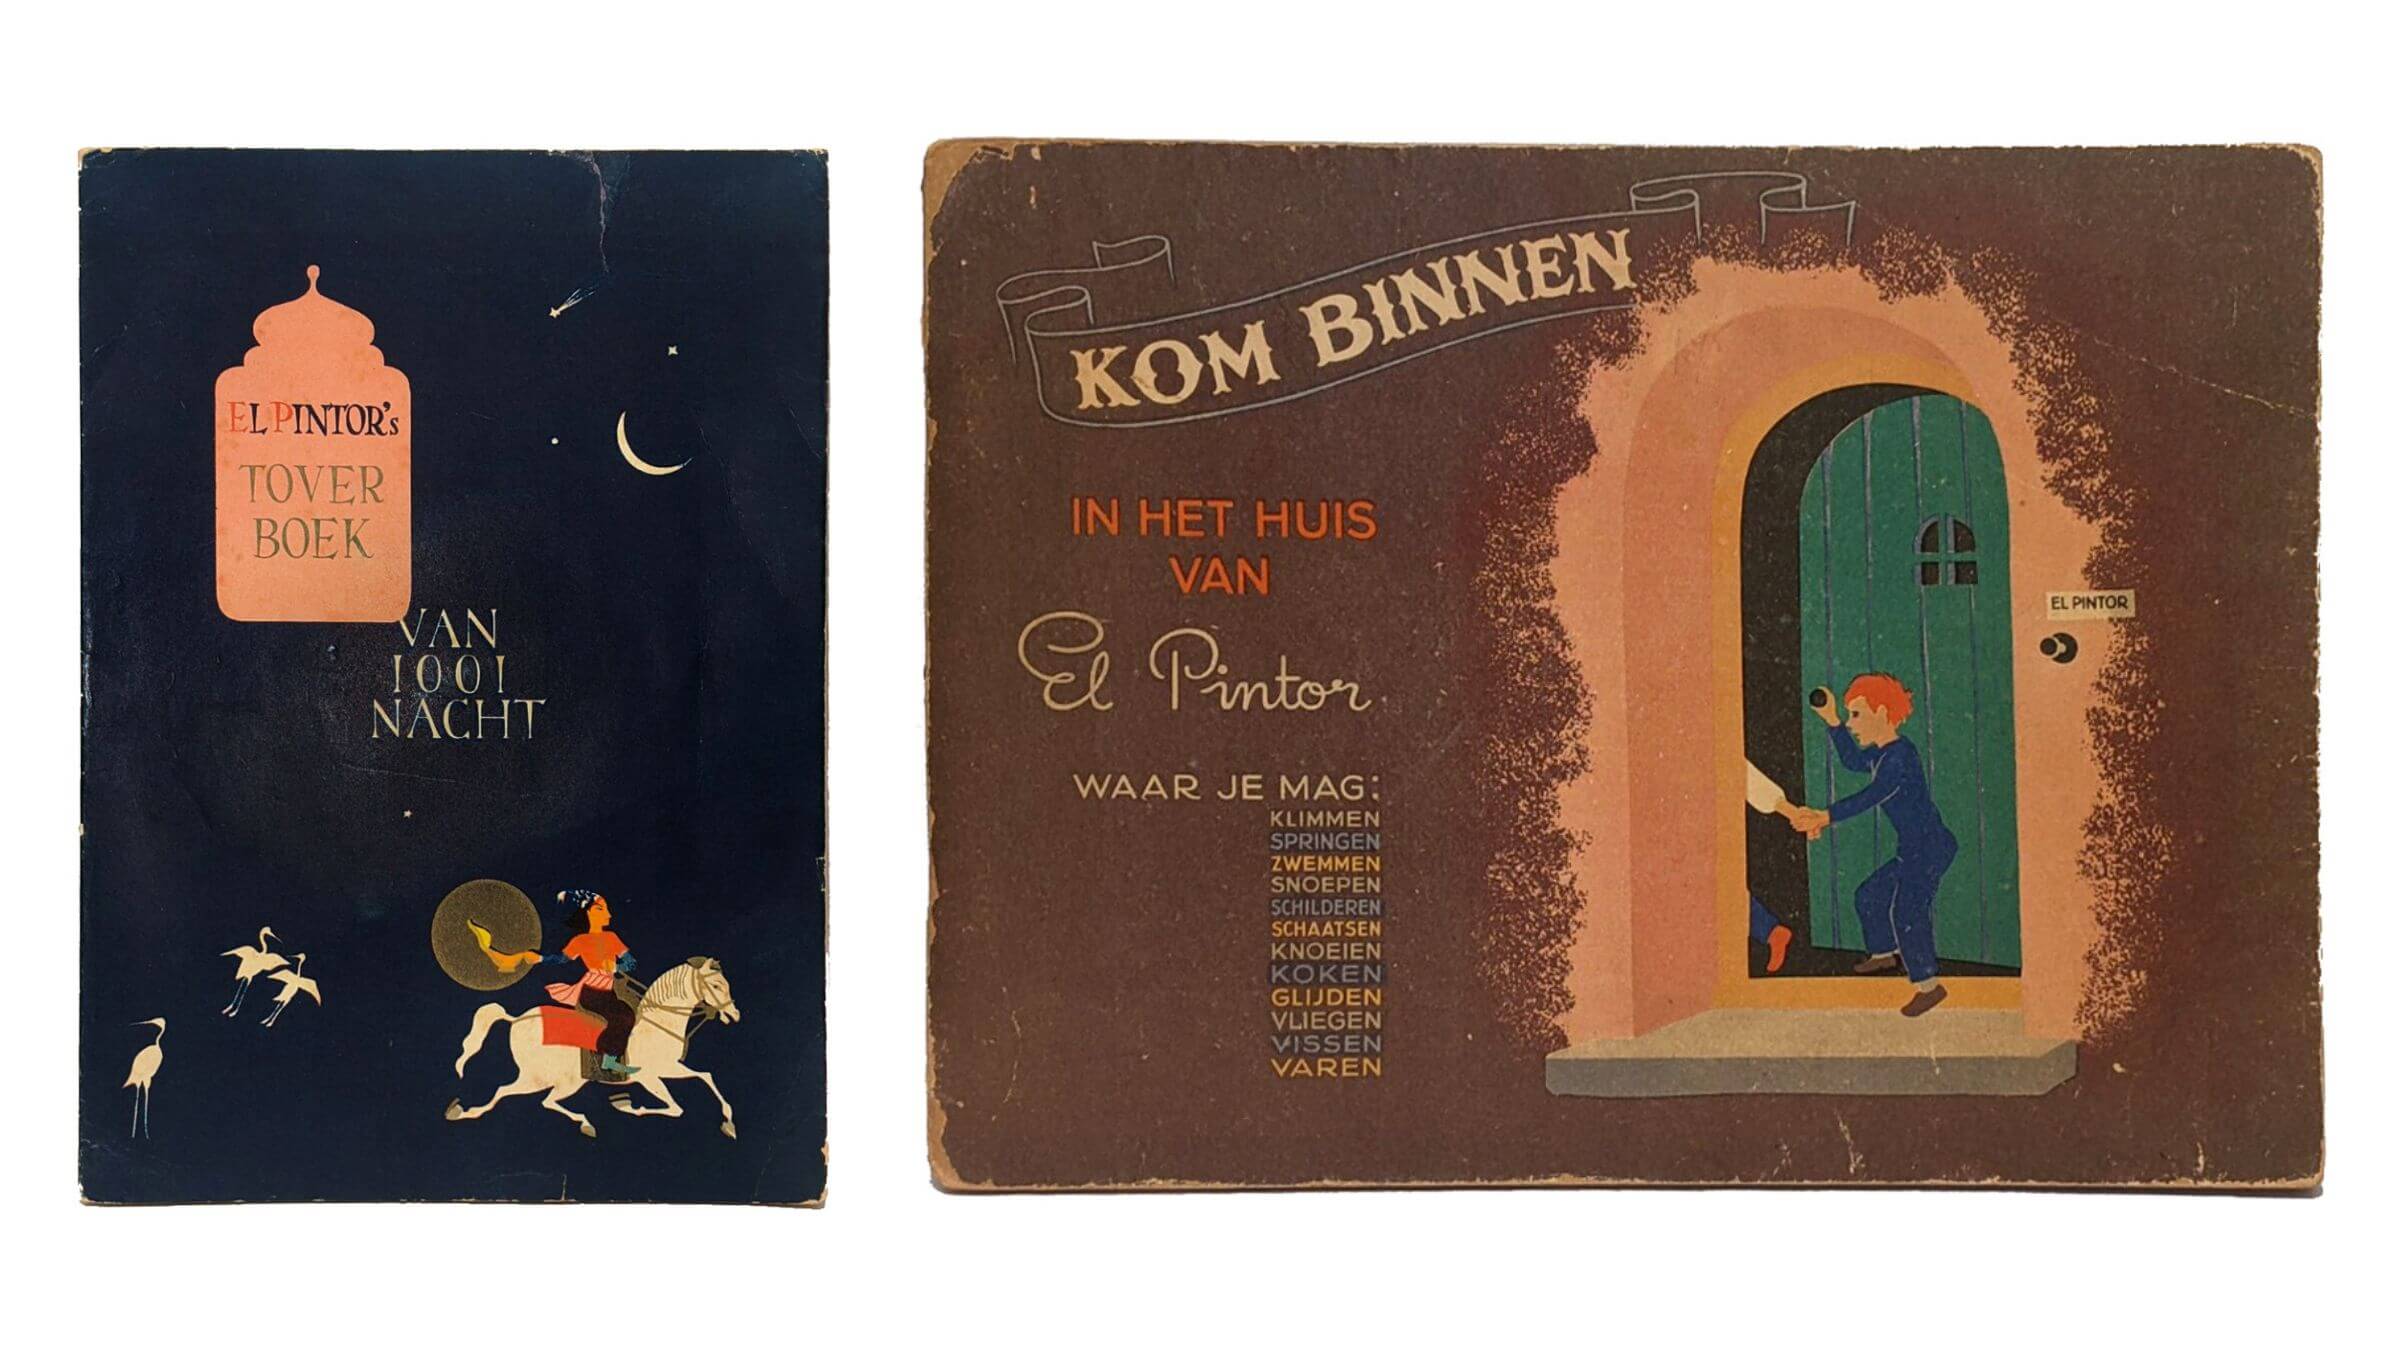 The photo shows two children's book covers. One features a horseman flying across the night sky; the other features a red-headed child knocking on a wooden door.